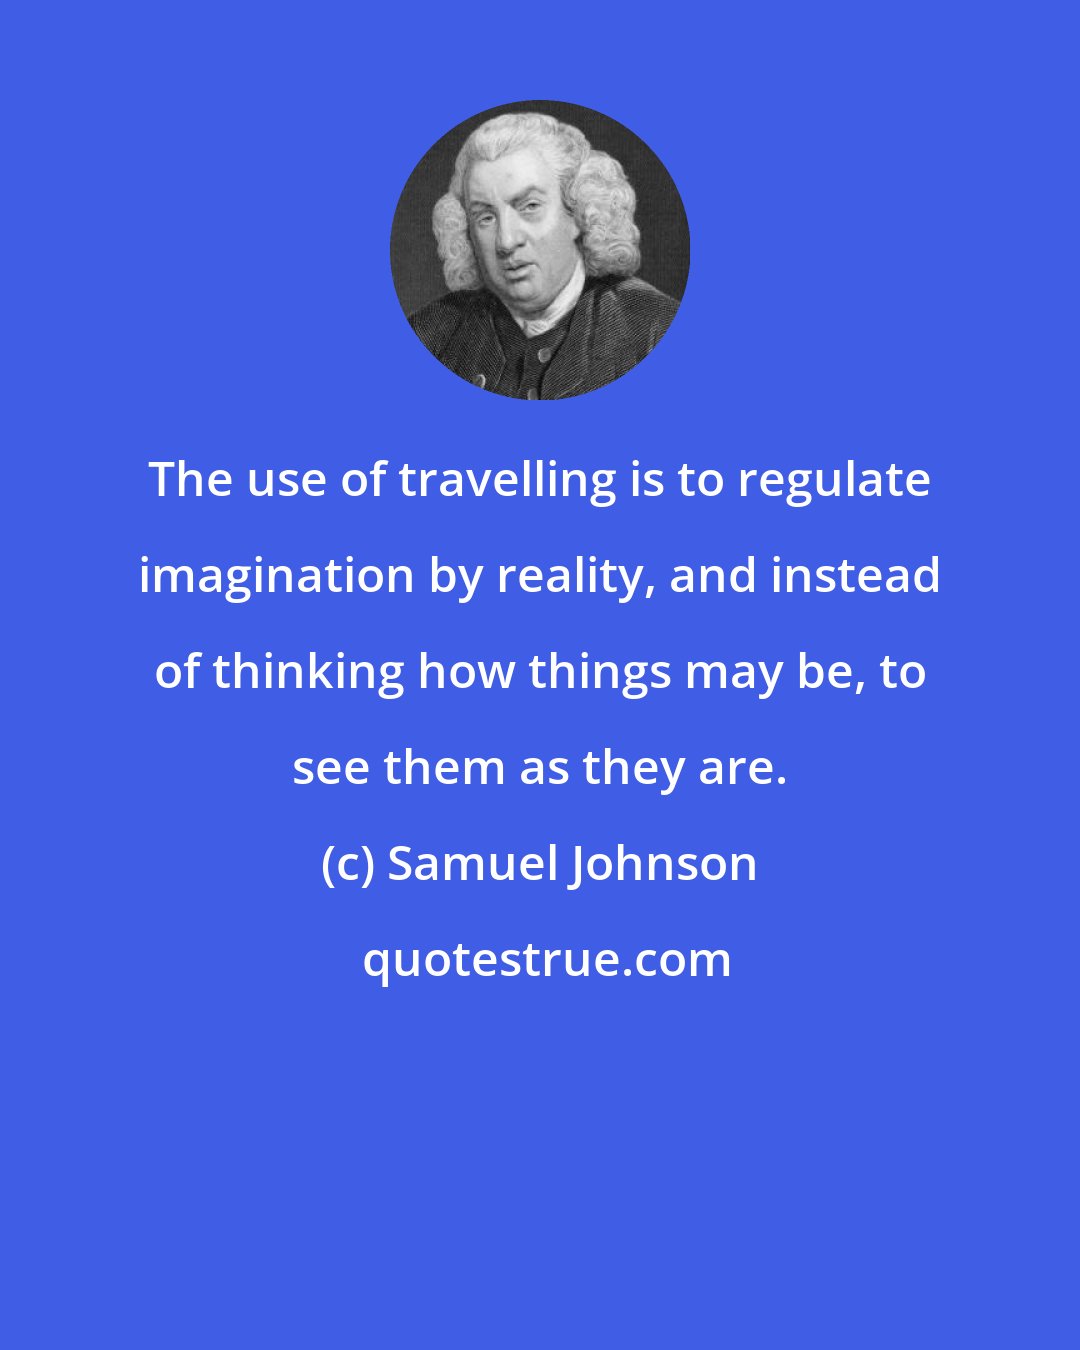 Samuel Johnson: The use of travelling is to regulate imagination by reality, and instead of thinking how things may be, to see them as they are.